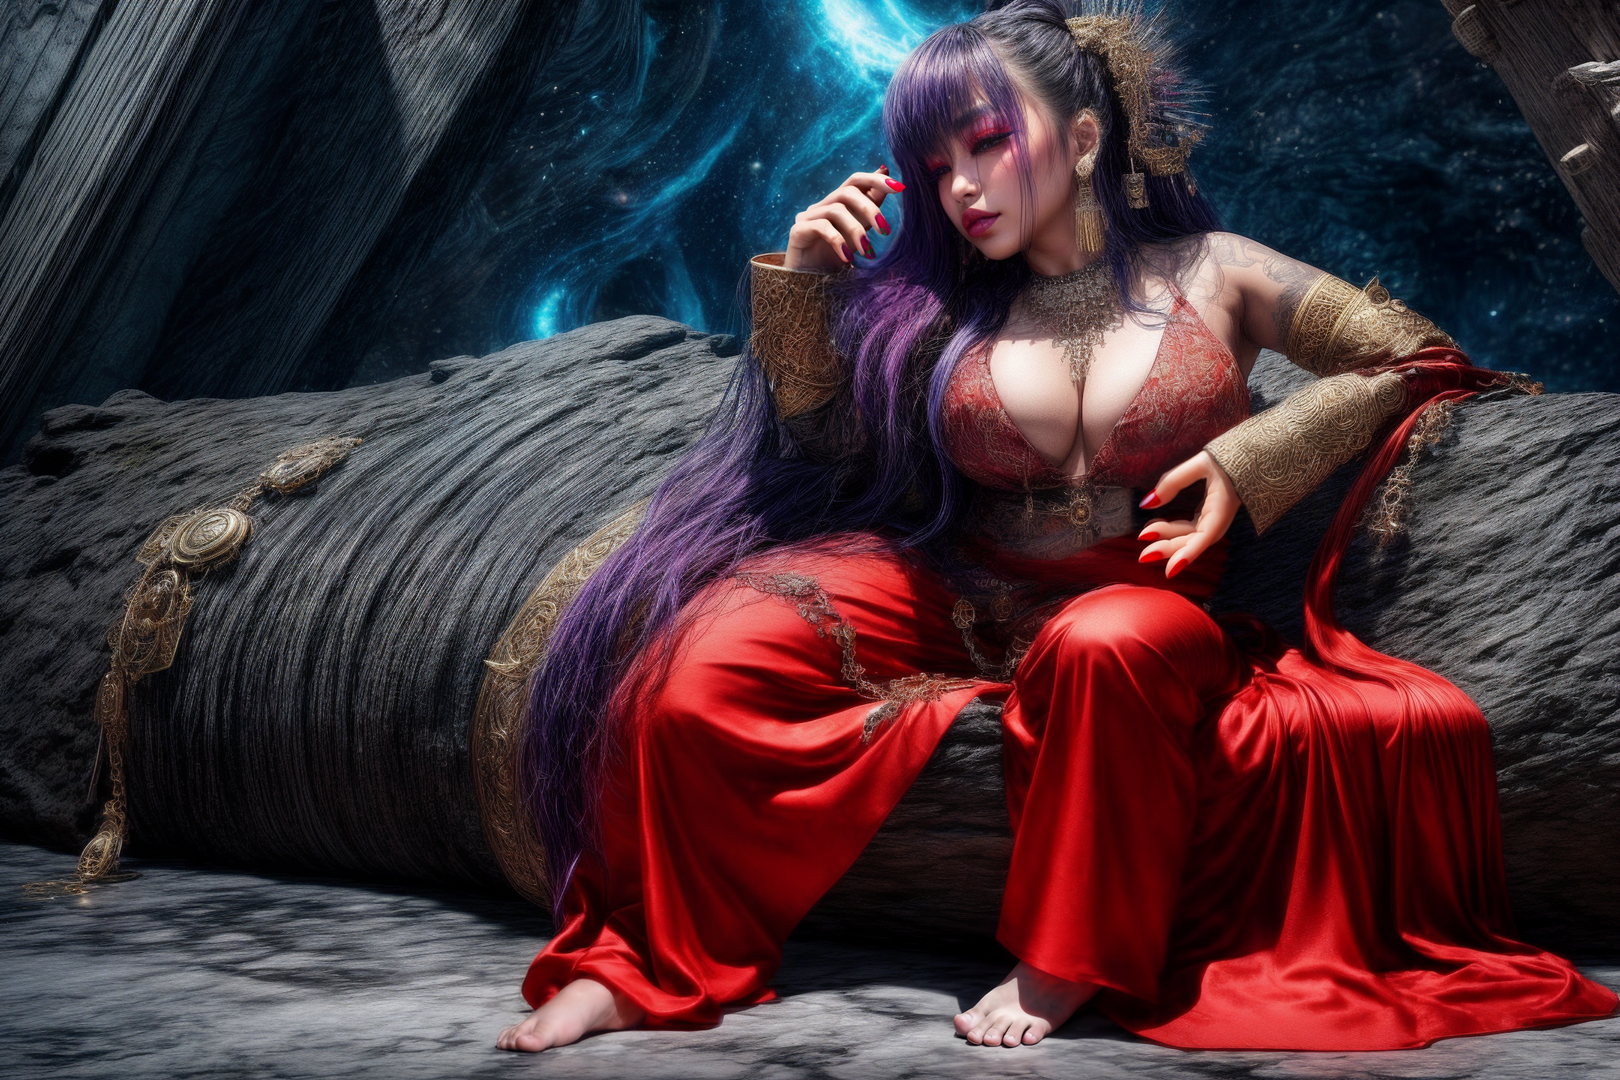 woman sitting on stone bench in space.png